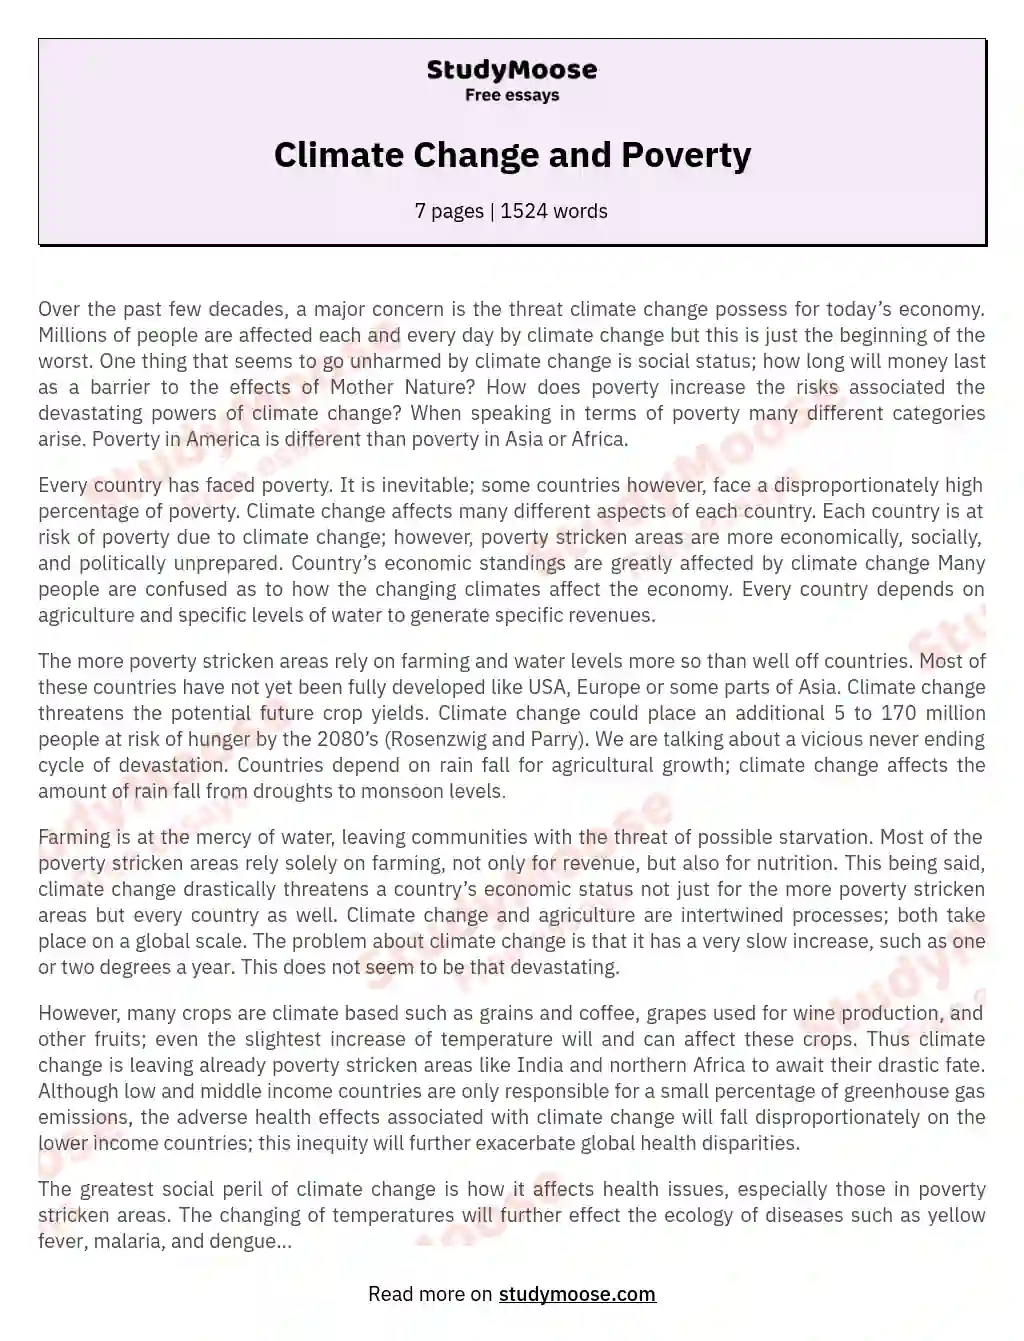 Climate Change and Poverty essay